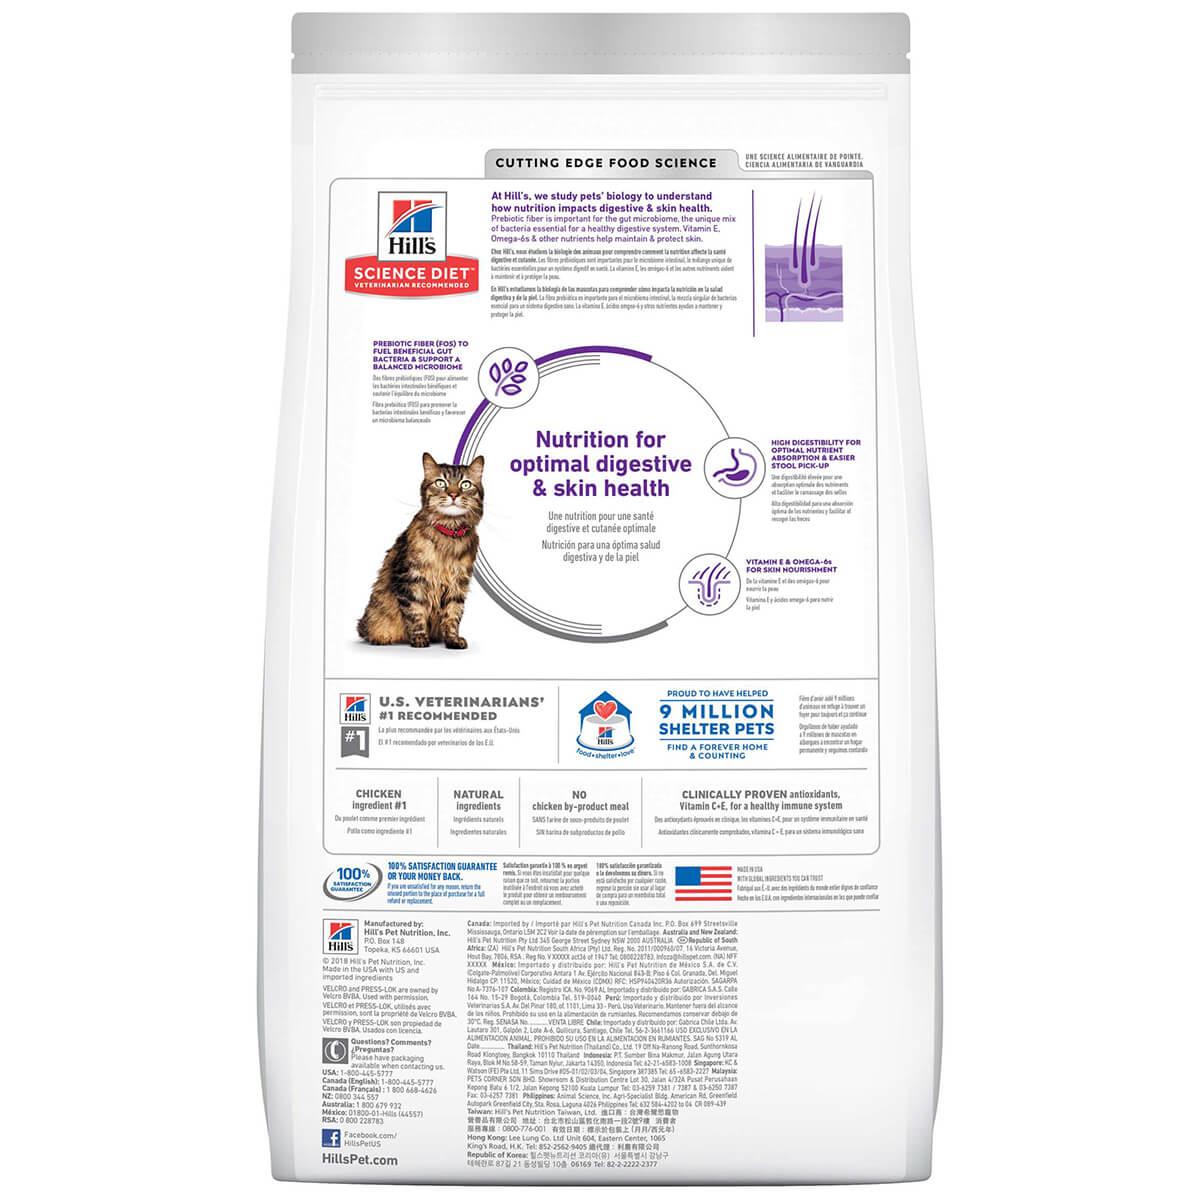 Hill's Science Diet Sensitive Stomach & Skin Adult Chicken Dry Cat Food